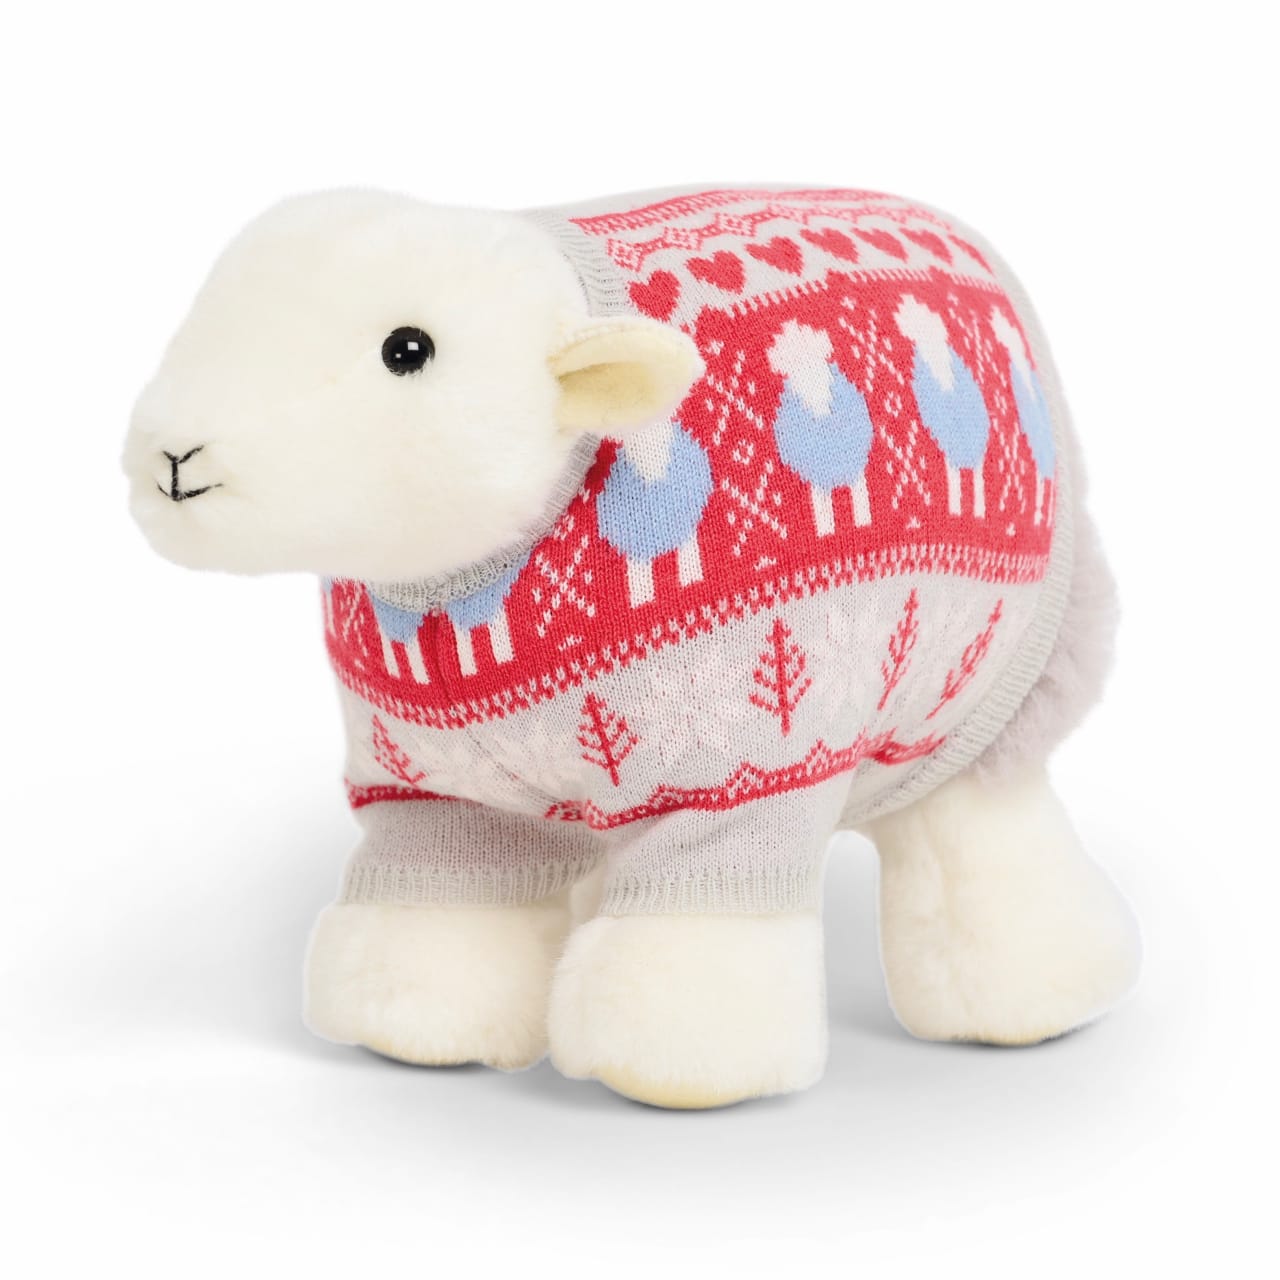 Launch photo of the most recent My Herdy collectible, My Herdy "Woolly Jumper"